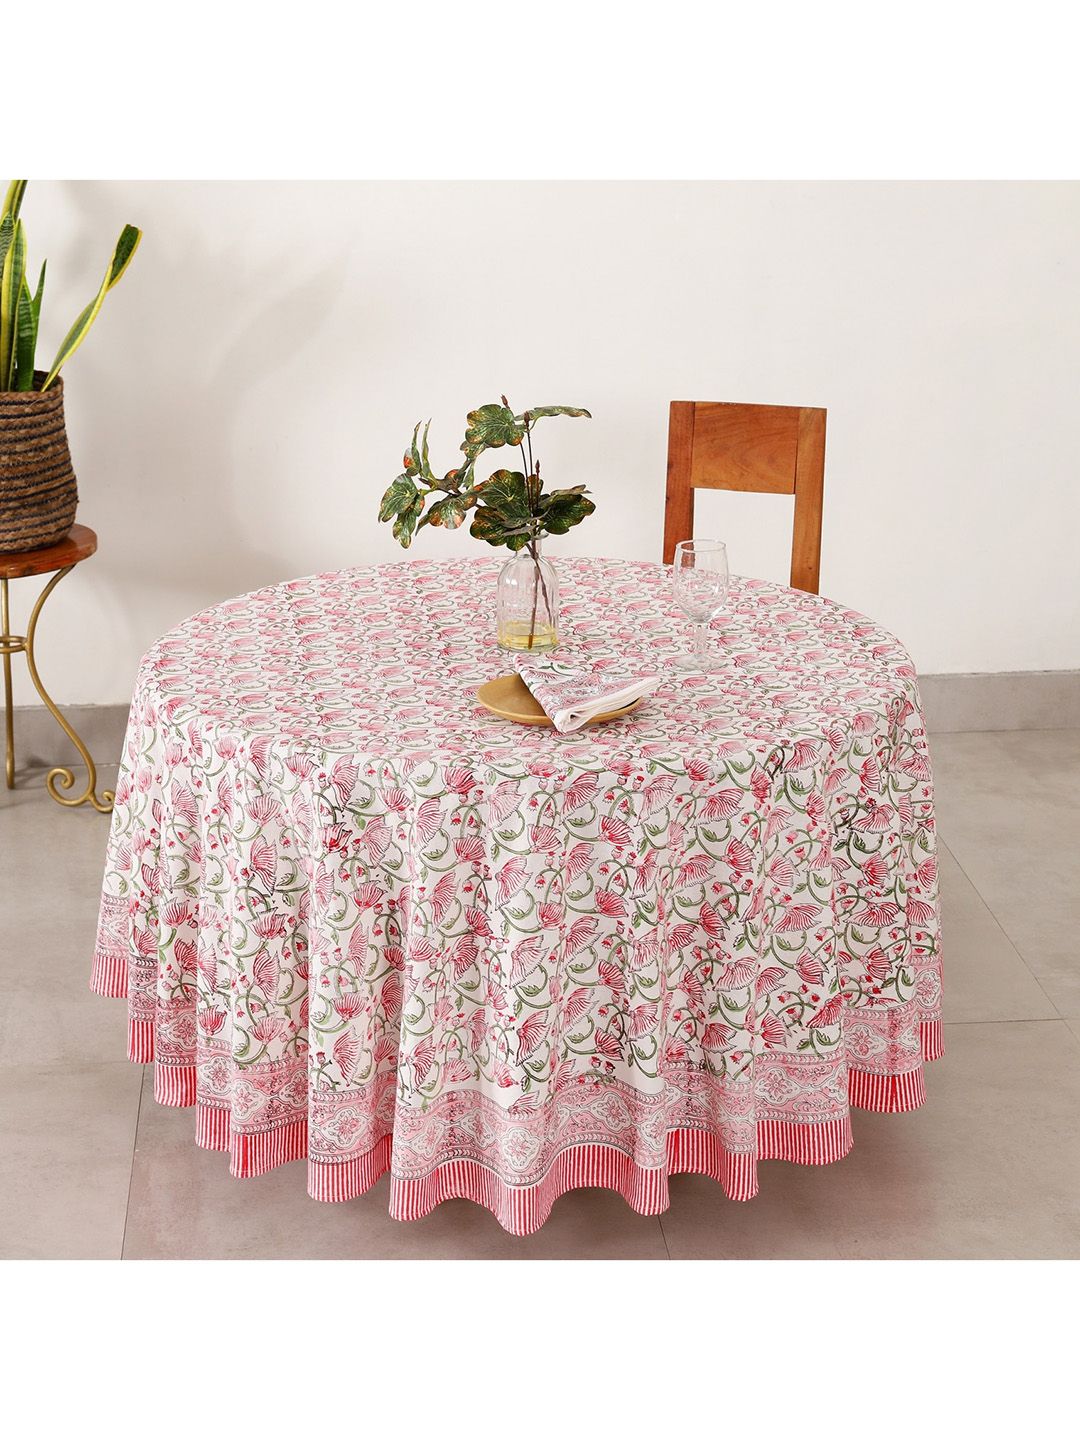 HANDICRAFT PALACE White & Pink Floral Hand Block Printed Table Cover With 4 Napkins Price in India